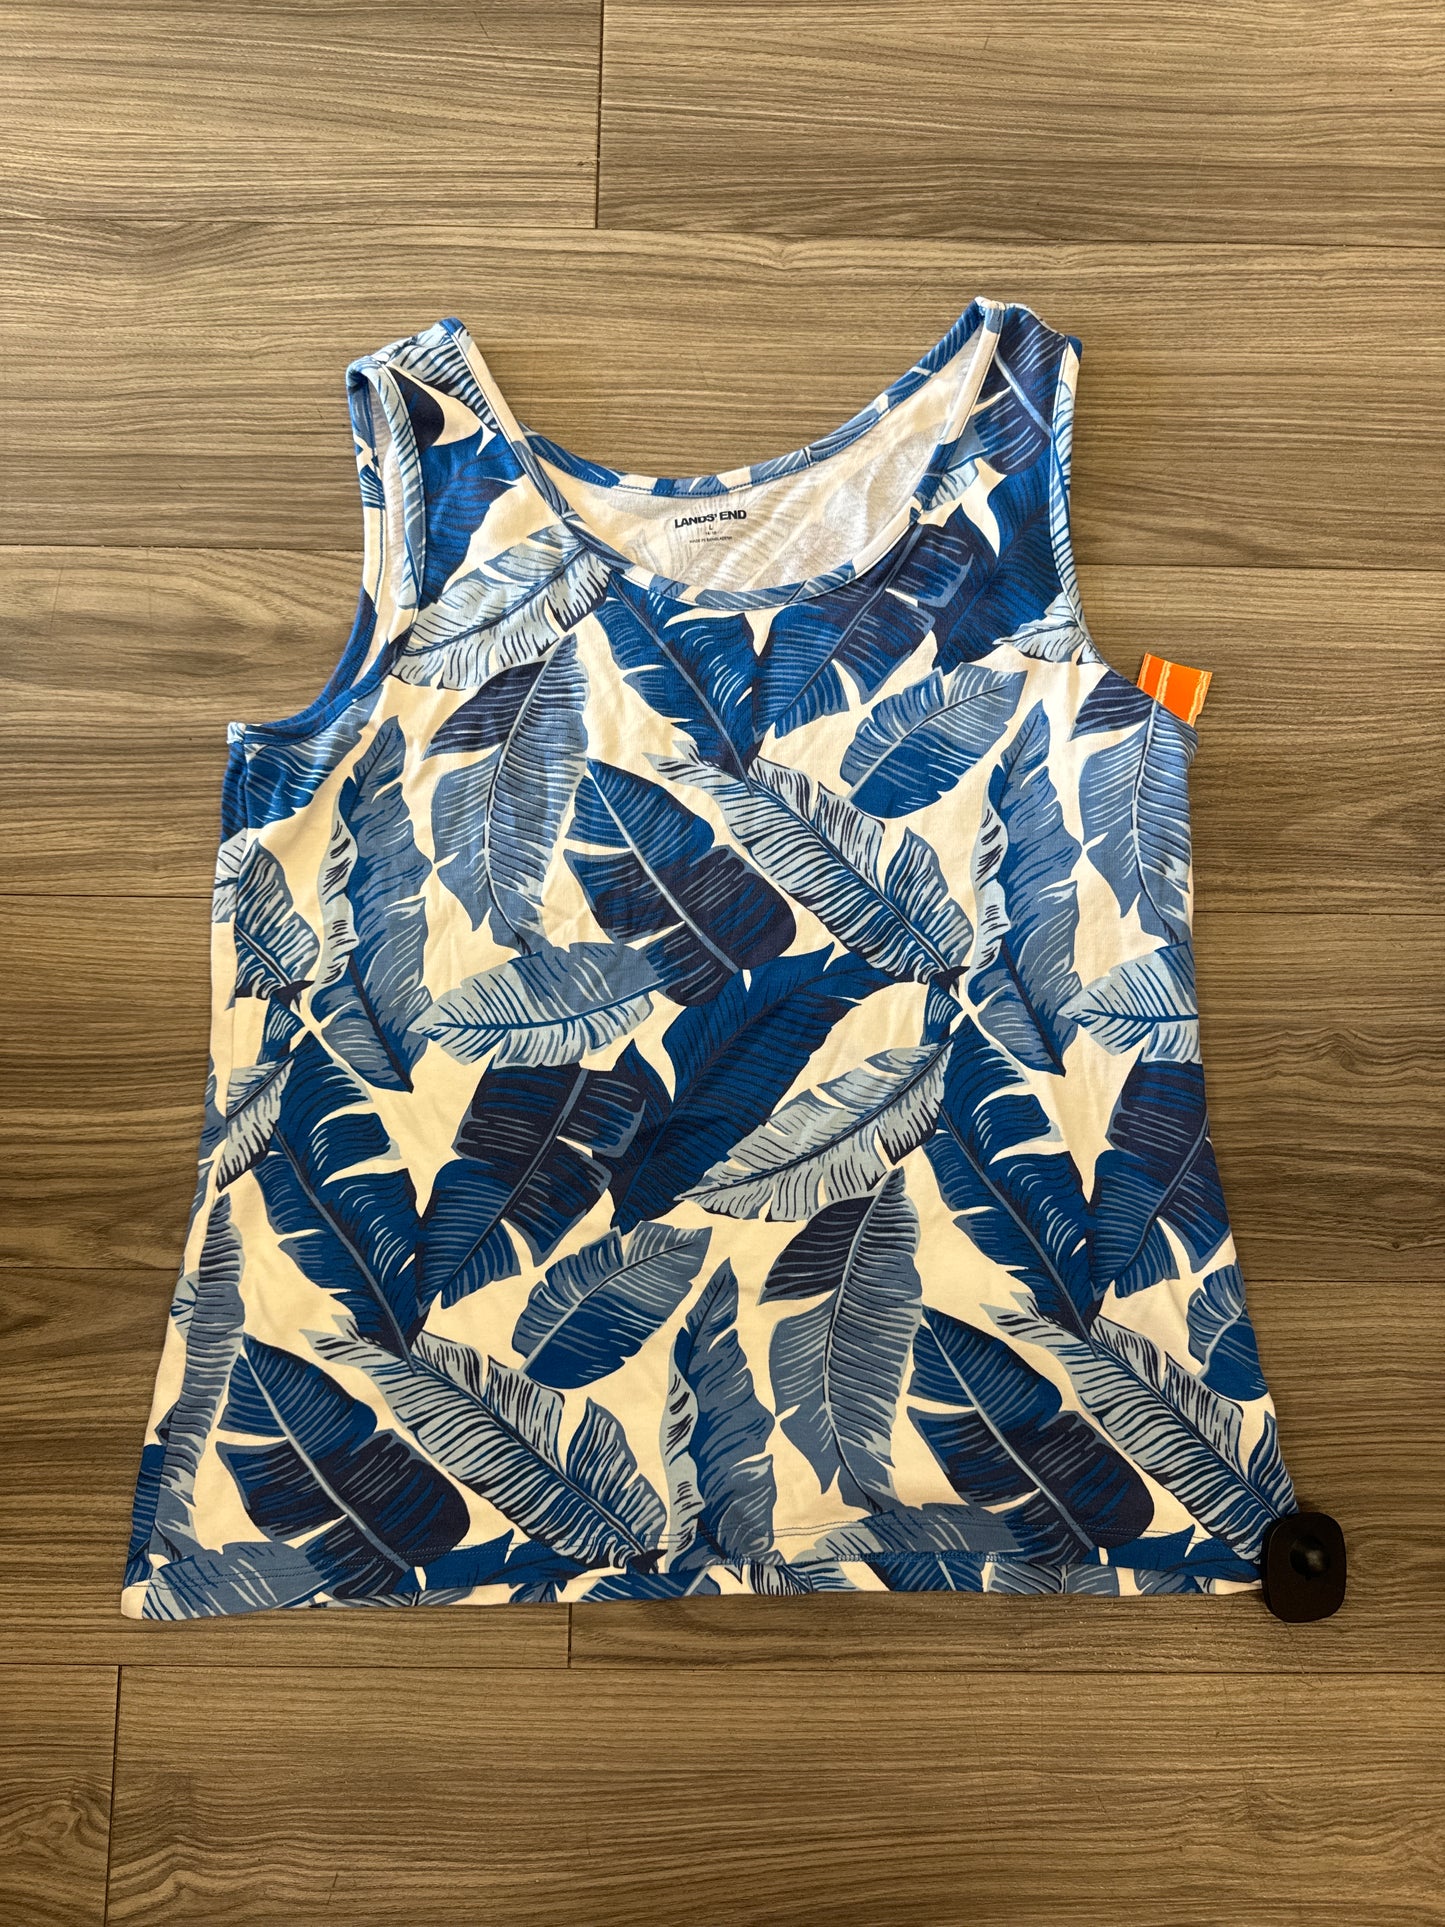 Tank Top By Lands End  Size: L